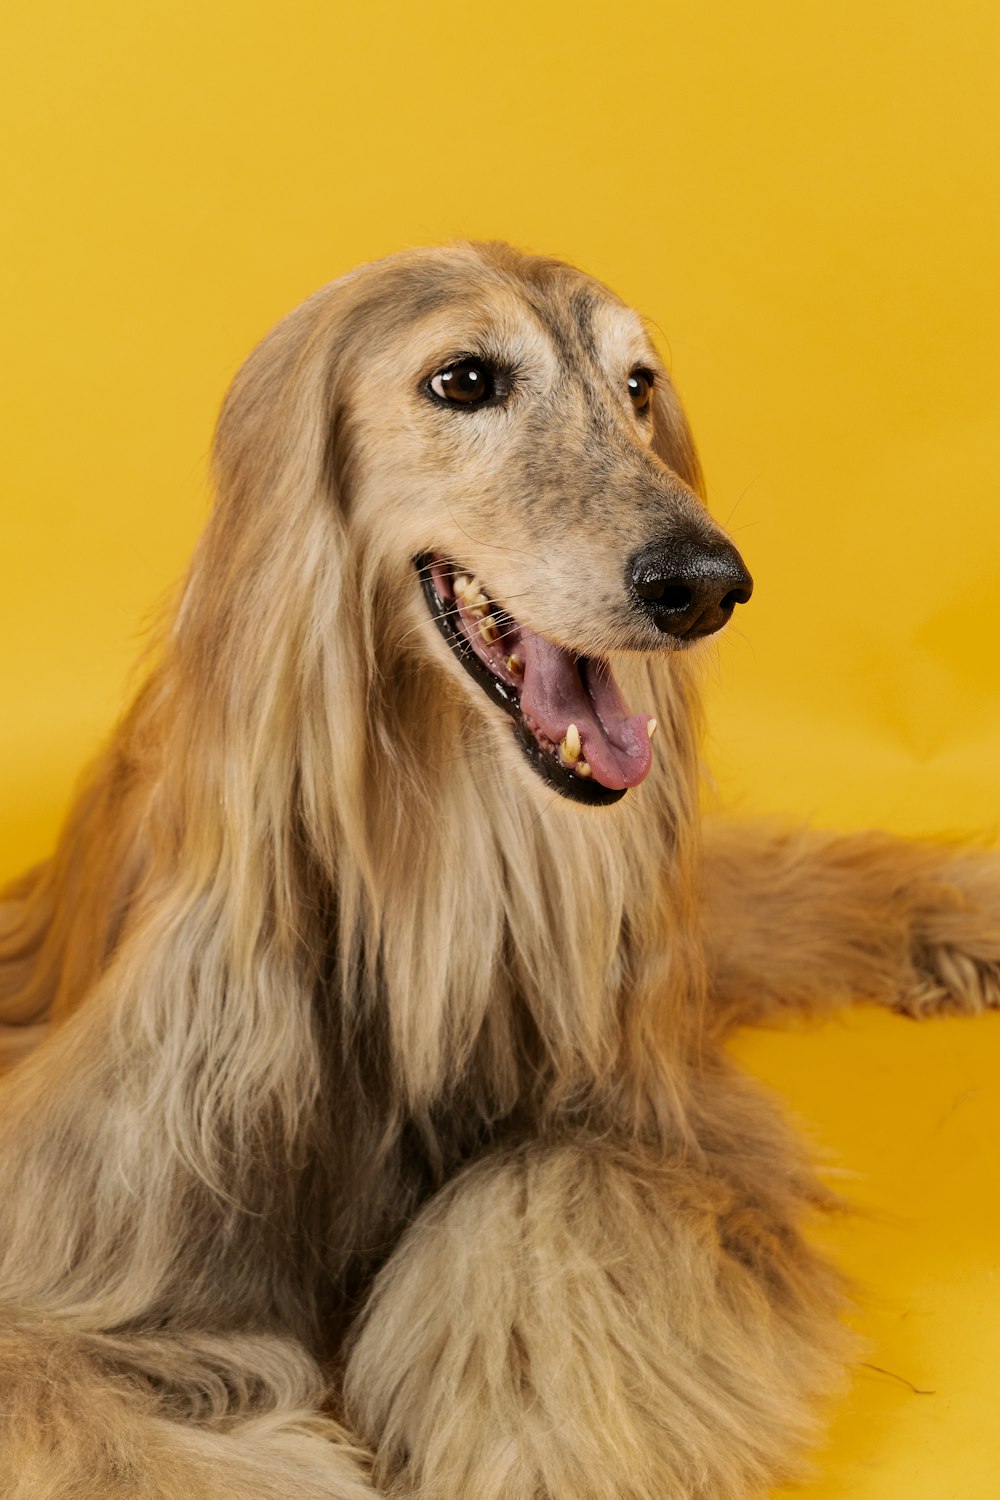 brown long haired dog lying on yellow textile